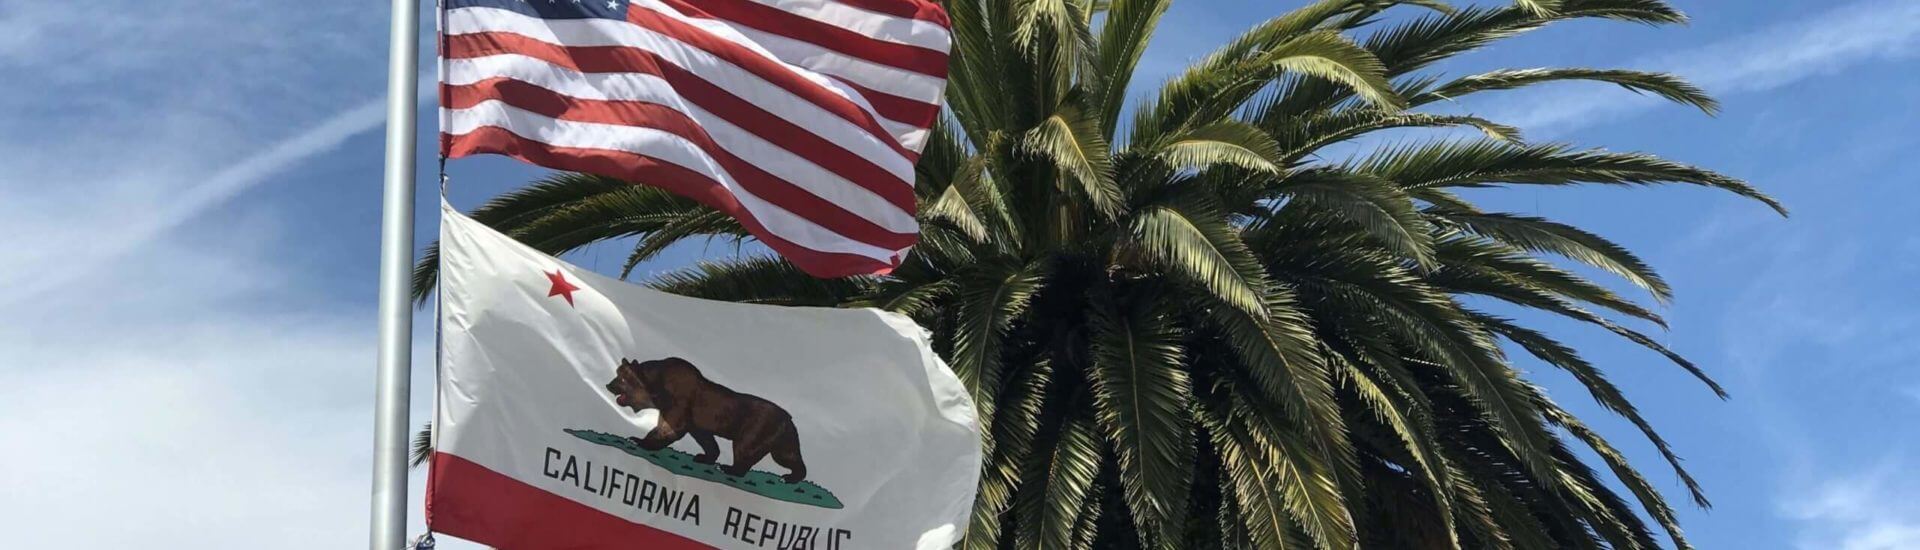 flag and palm